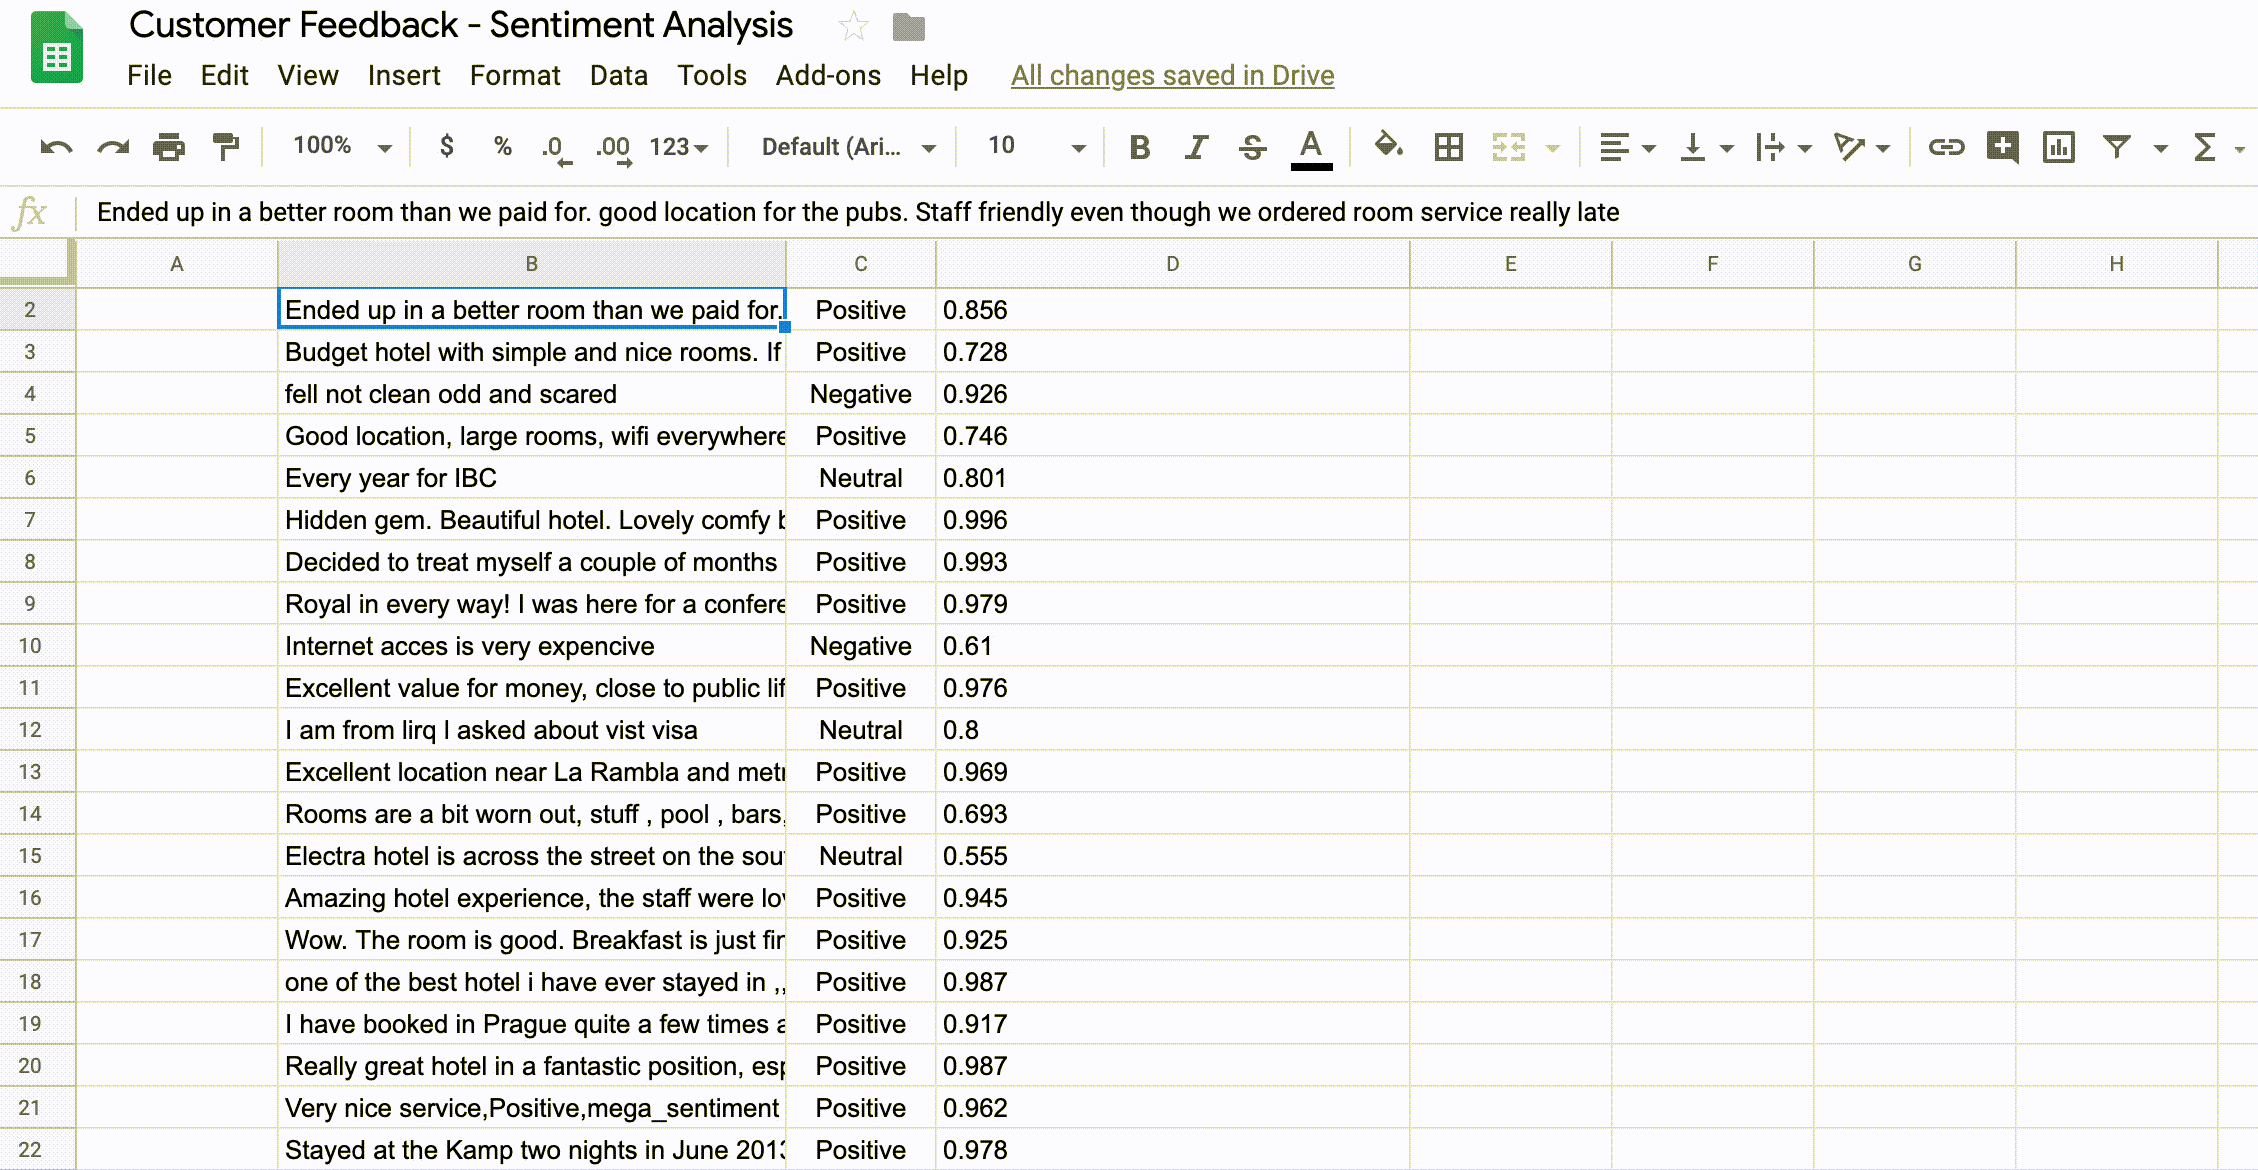 A CSV file showing each customer feedback comment scored as positive, negative, or neutral.